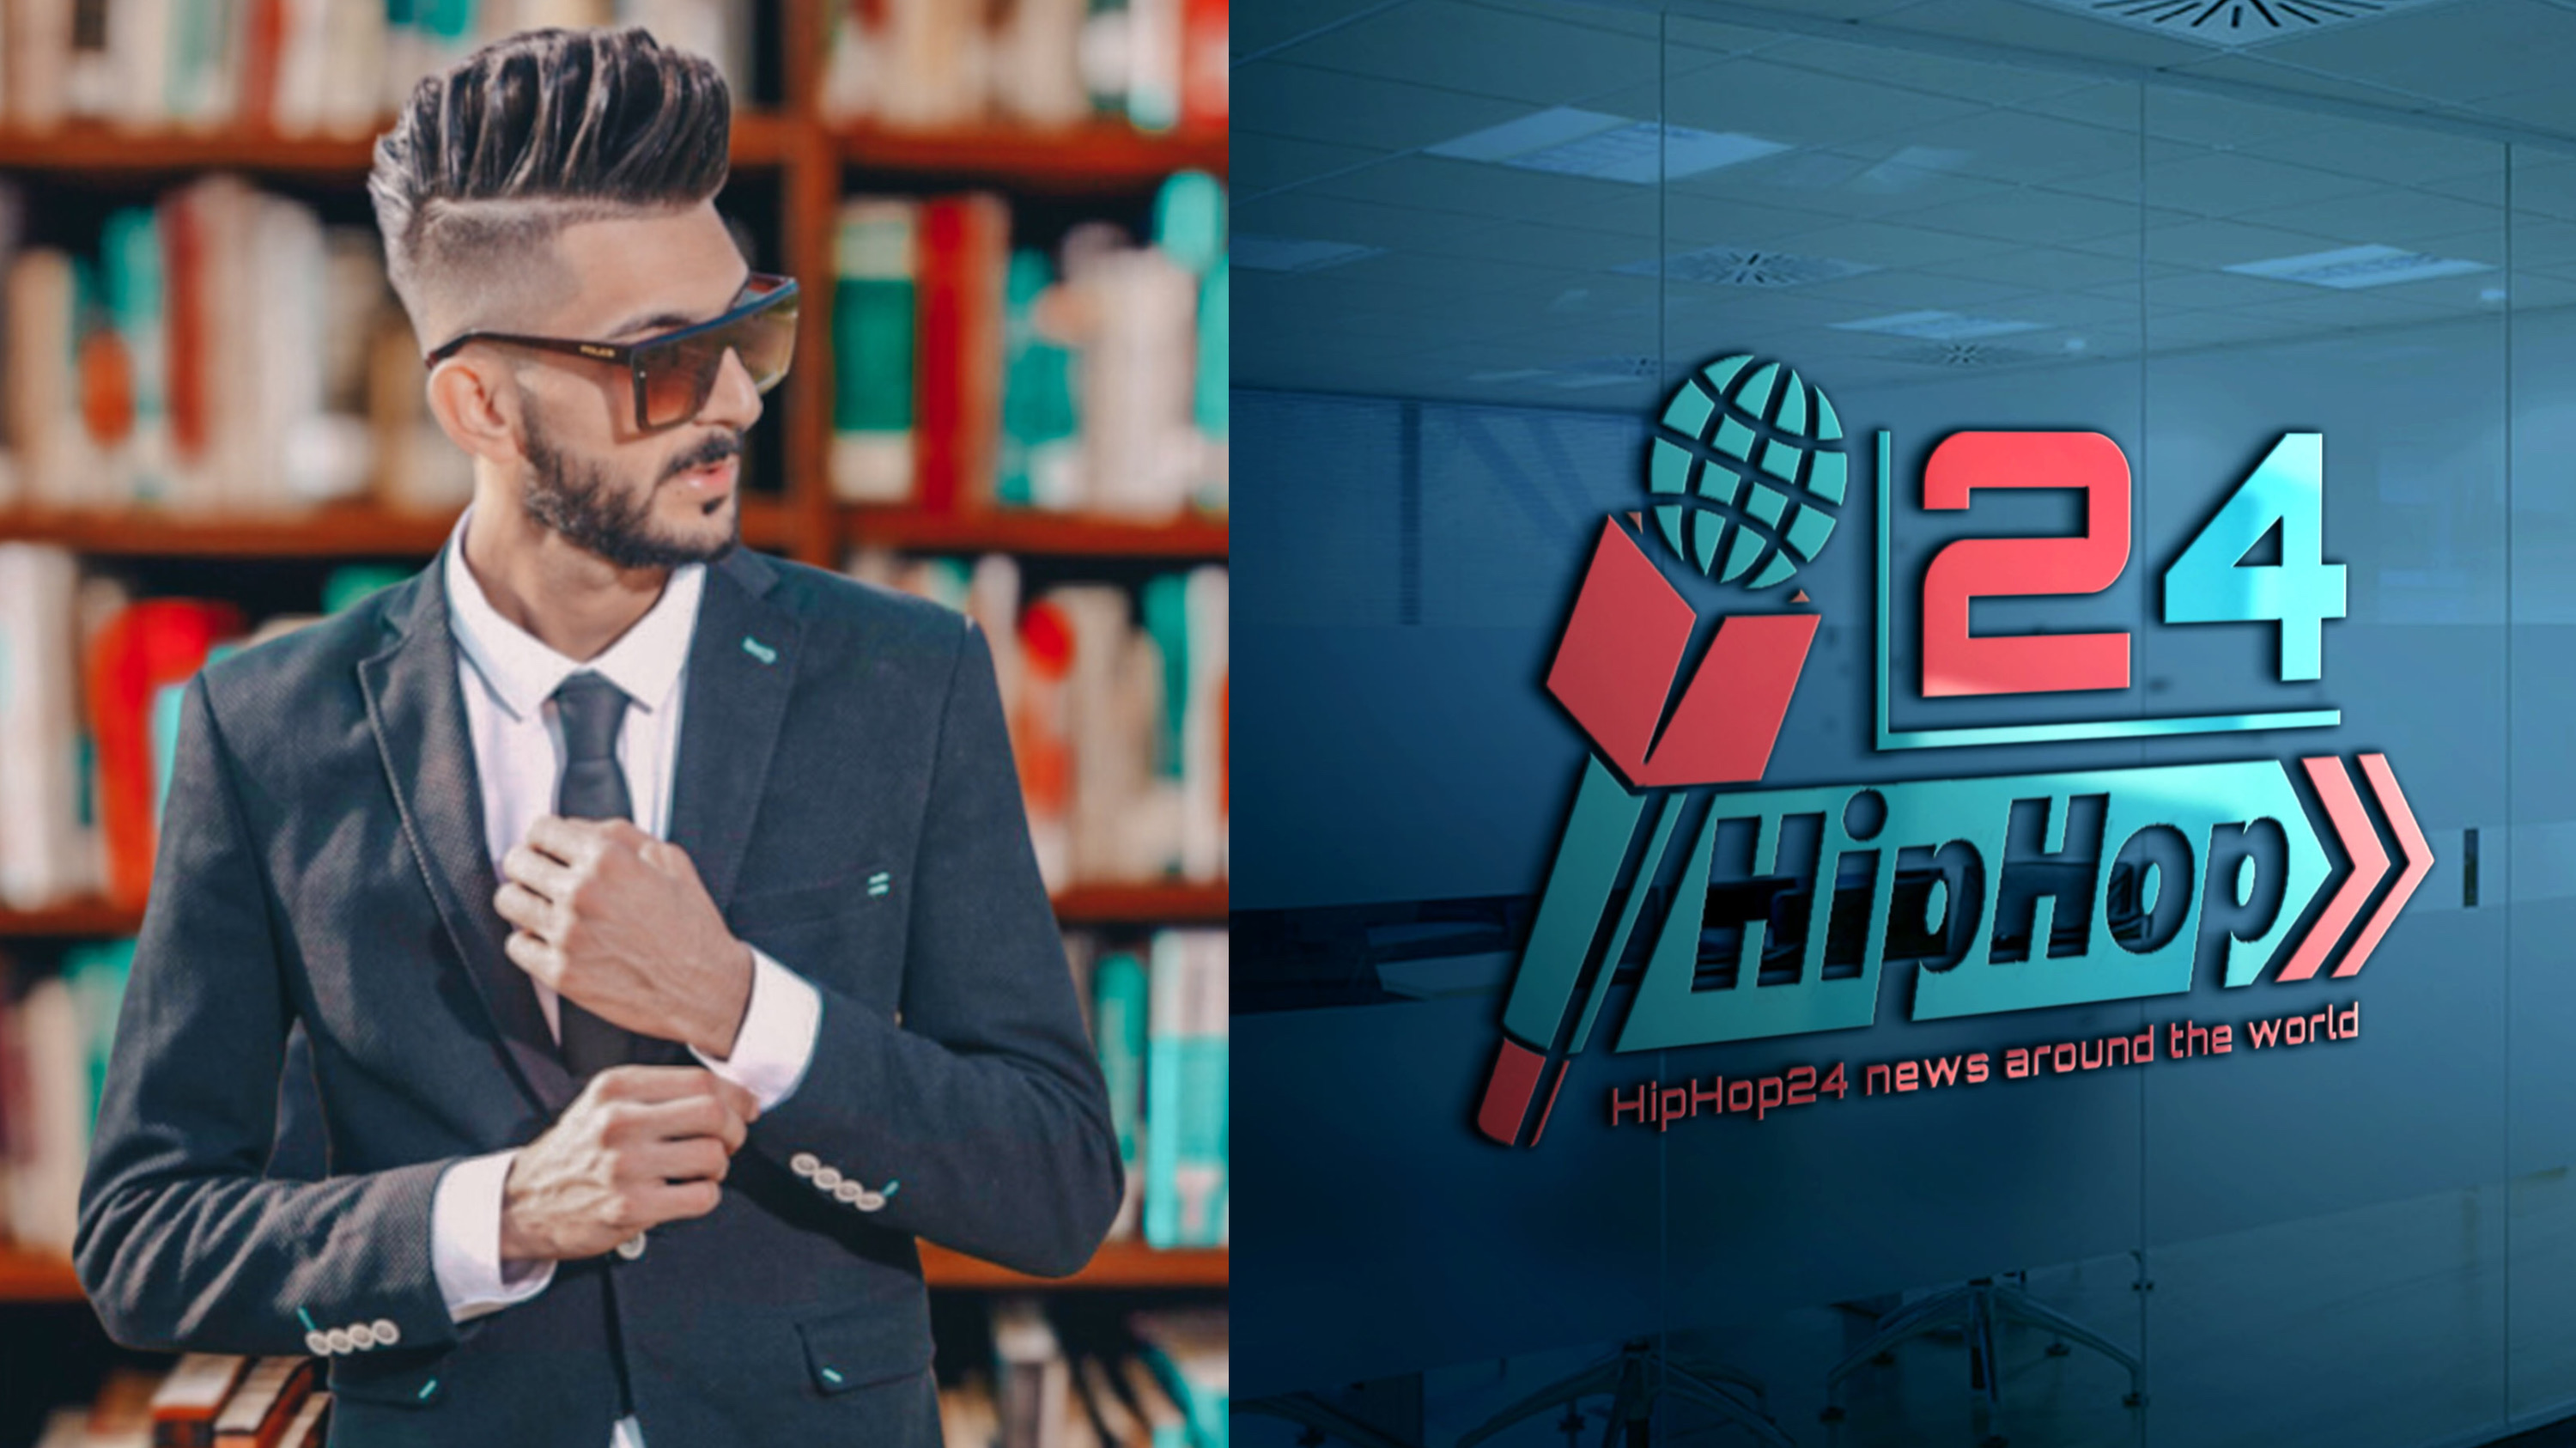 Hasan Almajidy is an Iraqi entrepreneur and founder of HipHop24